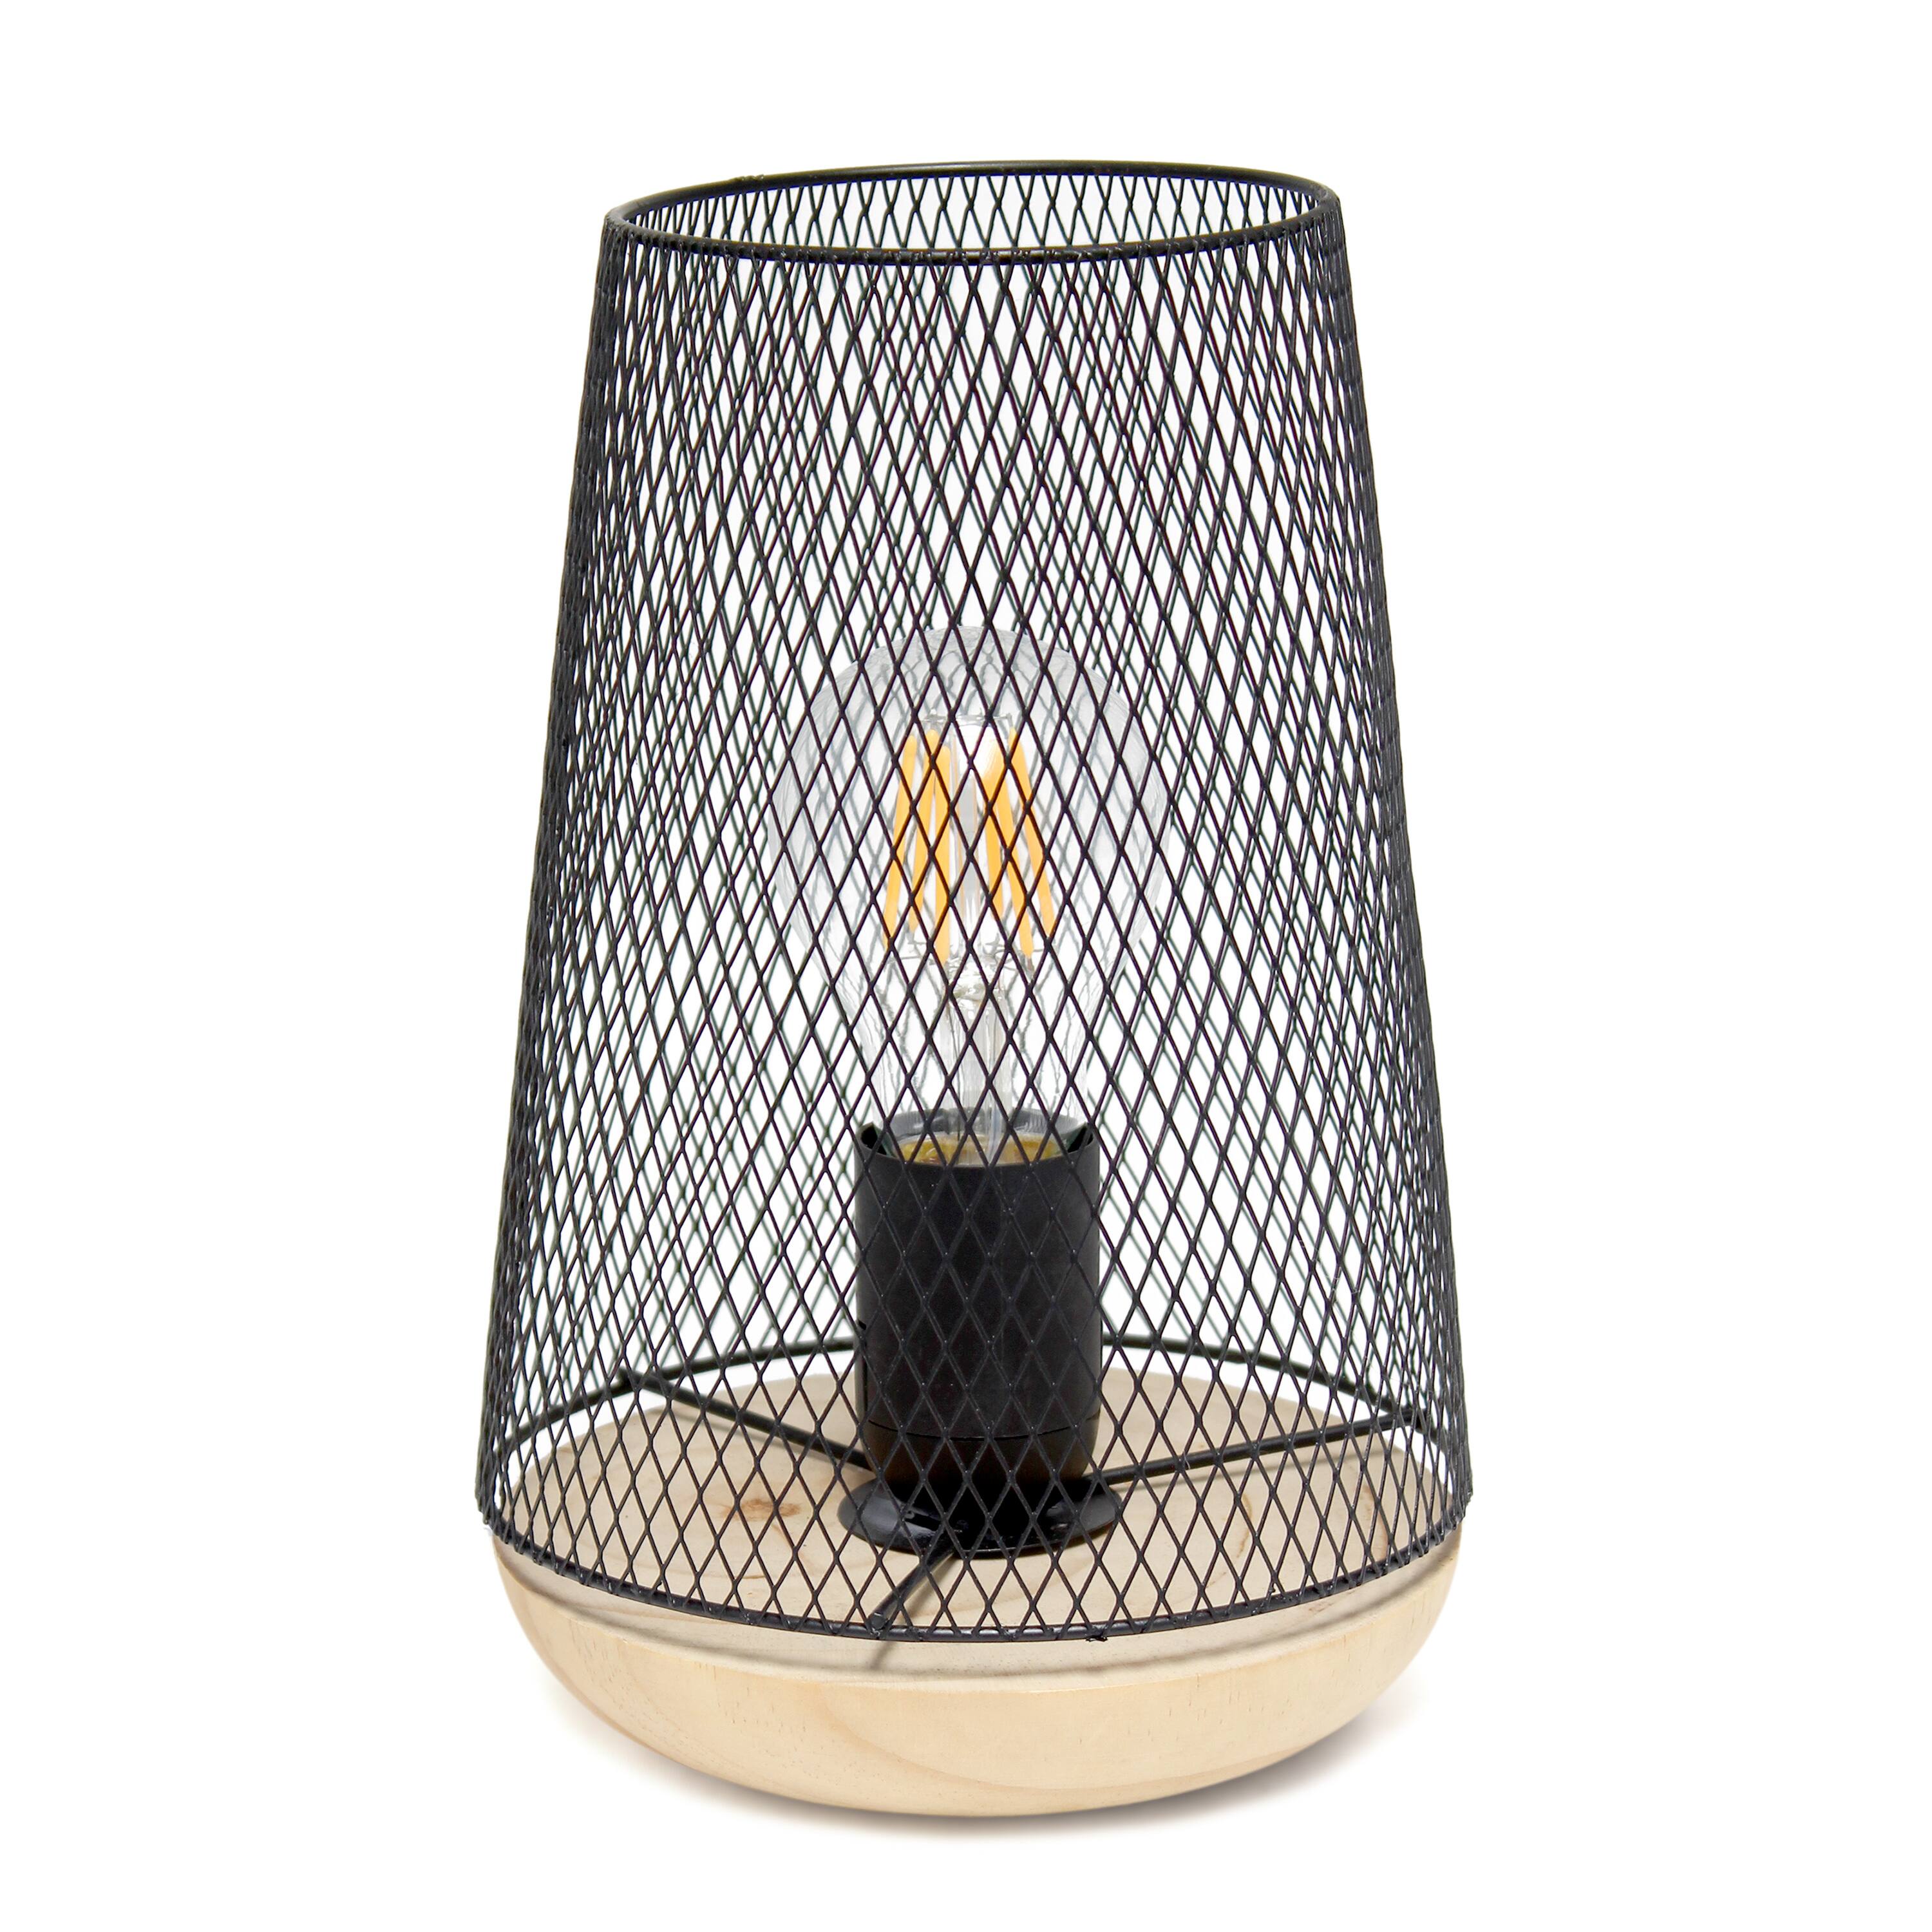 Simple Designs 9" Wired Mesh Uplight Table Lamp